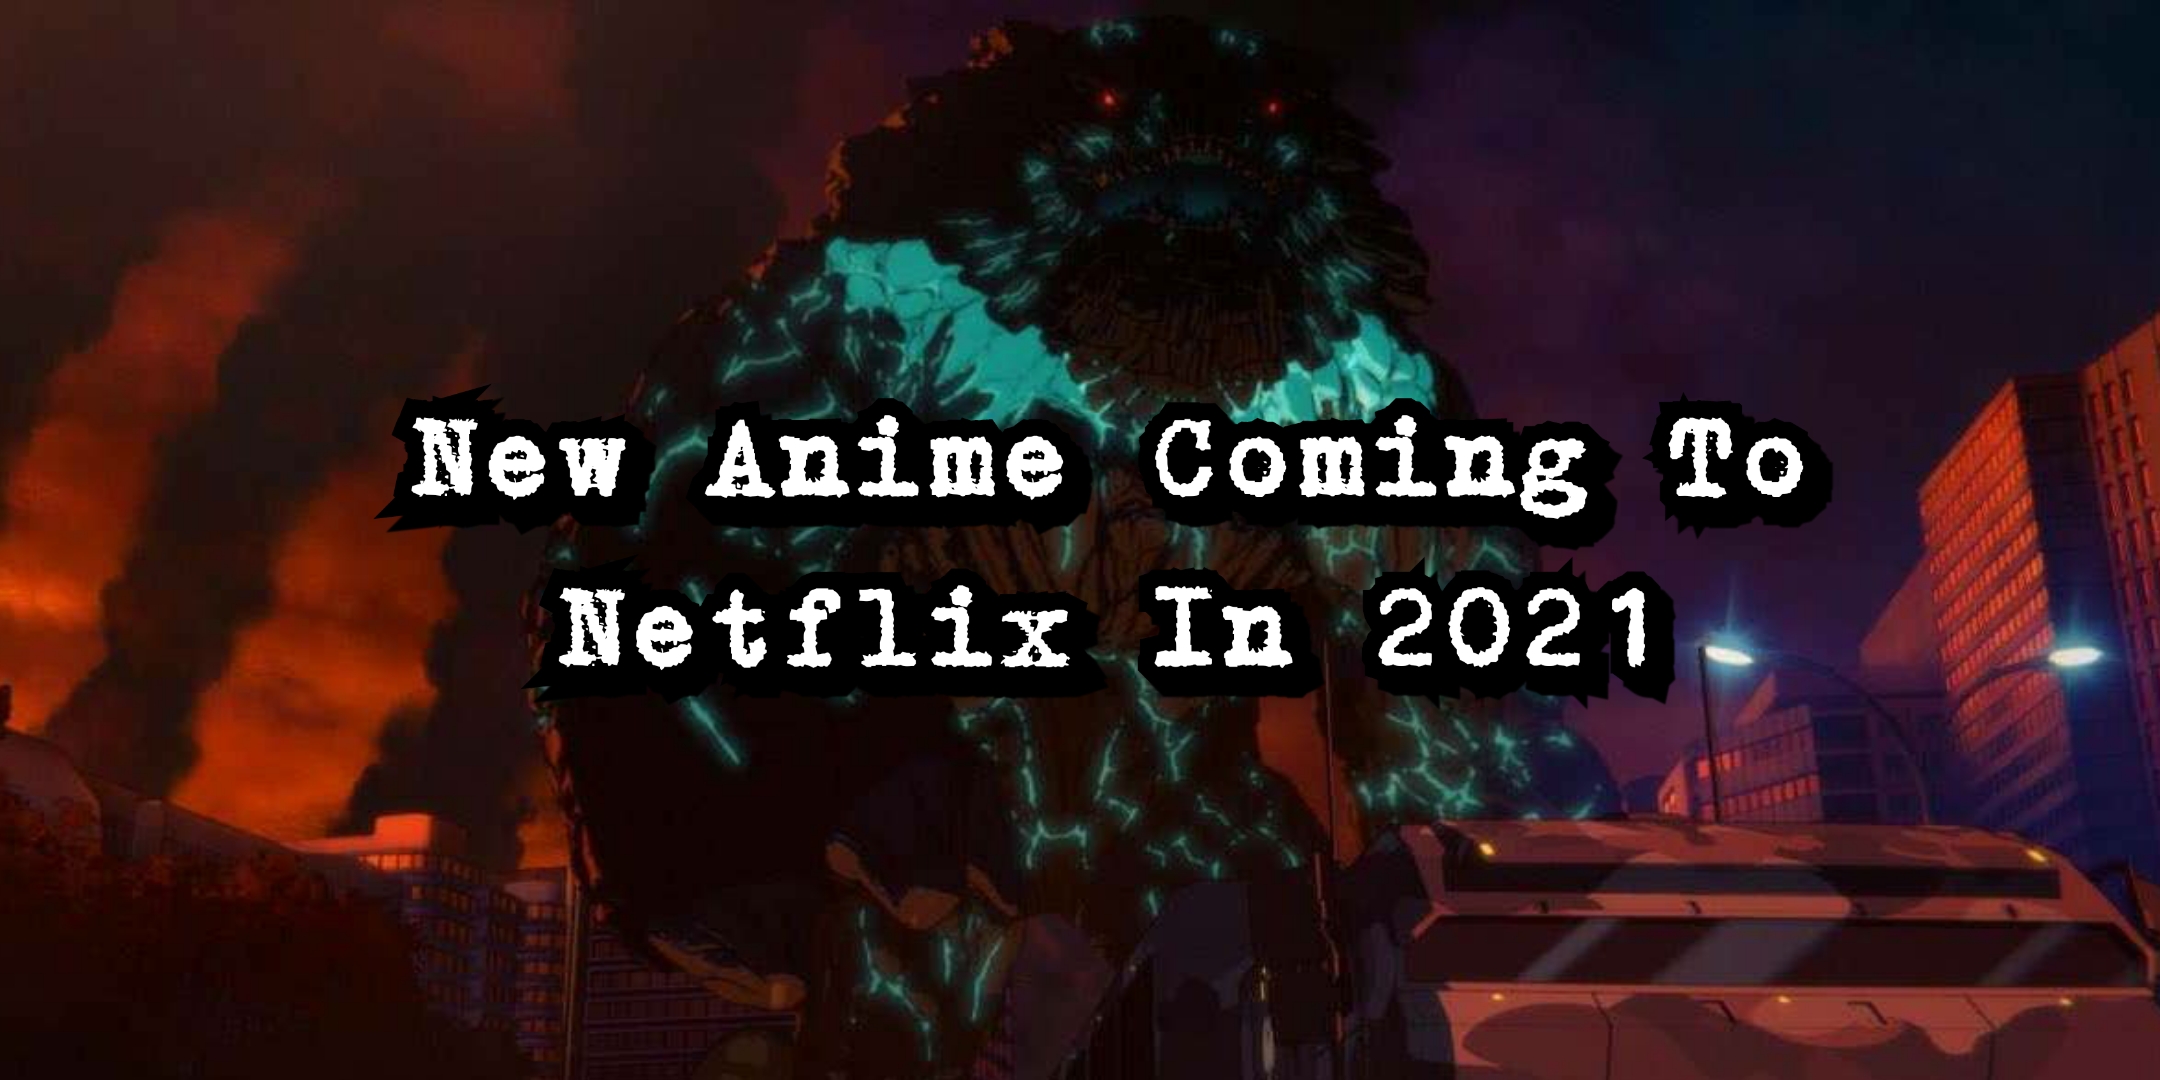 Cyberpunk Edgerunners  coming to Netflix this September  Home of the  Cyberpunk 2077 universe  games anime  more